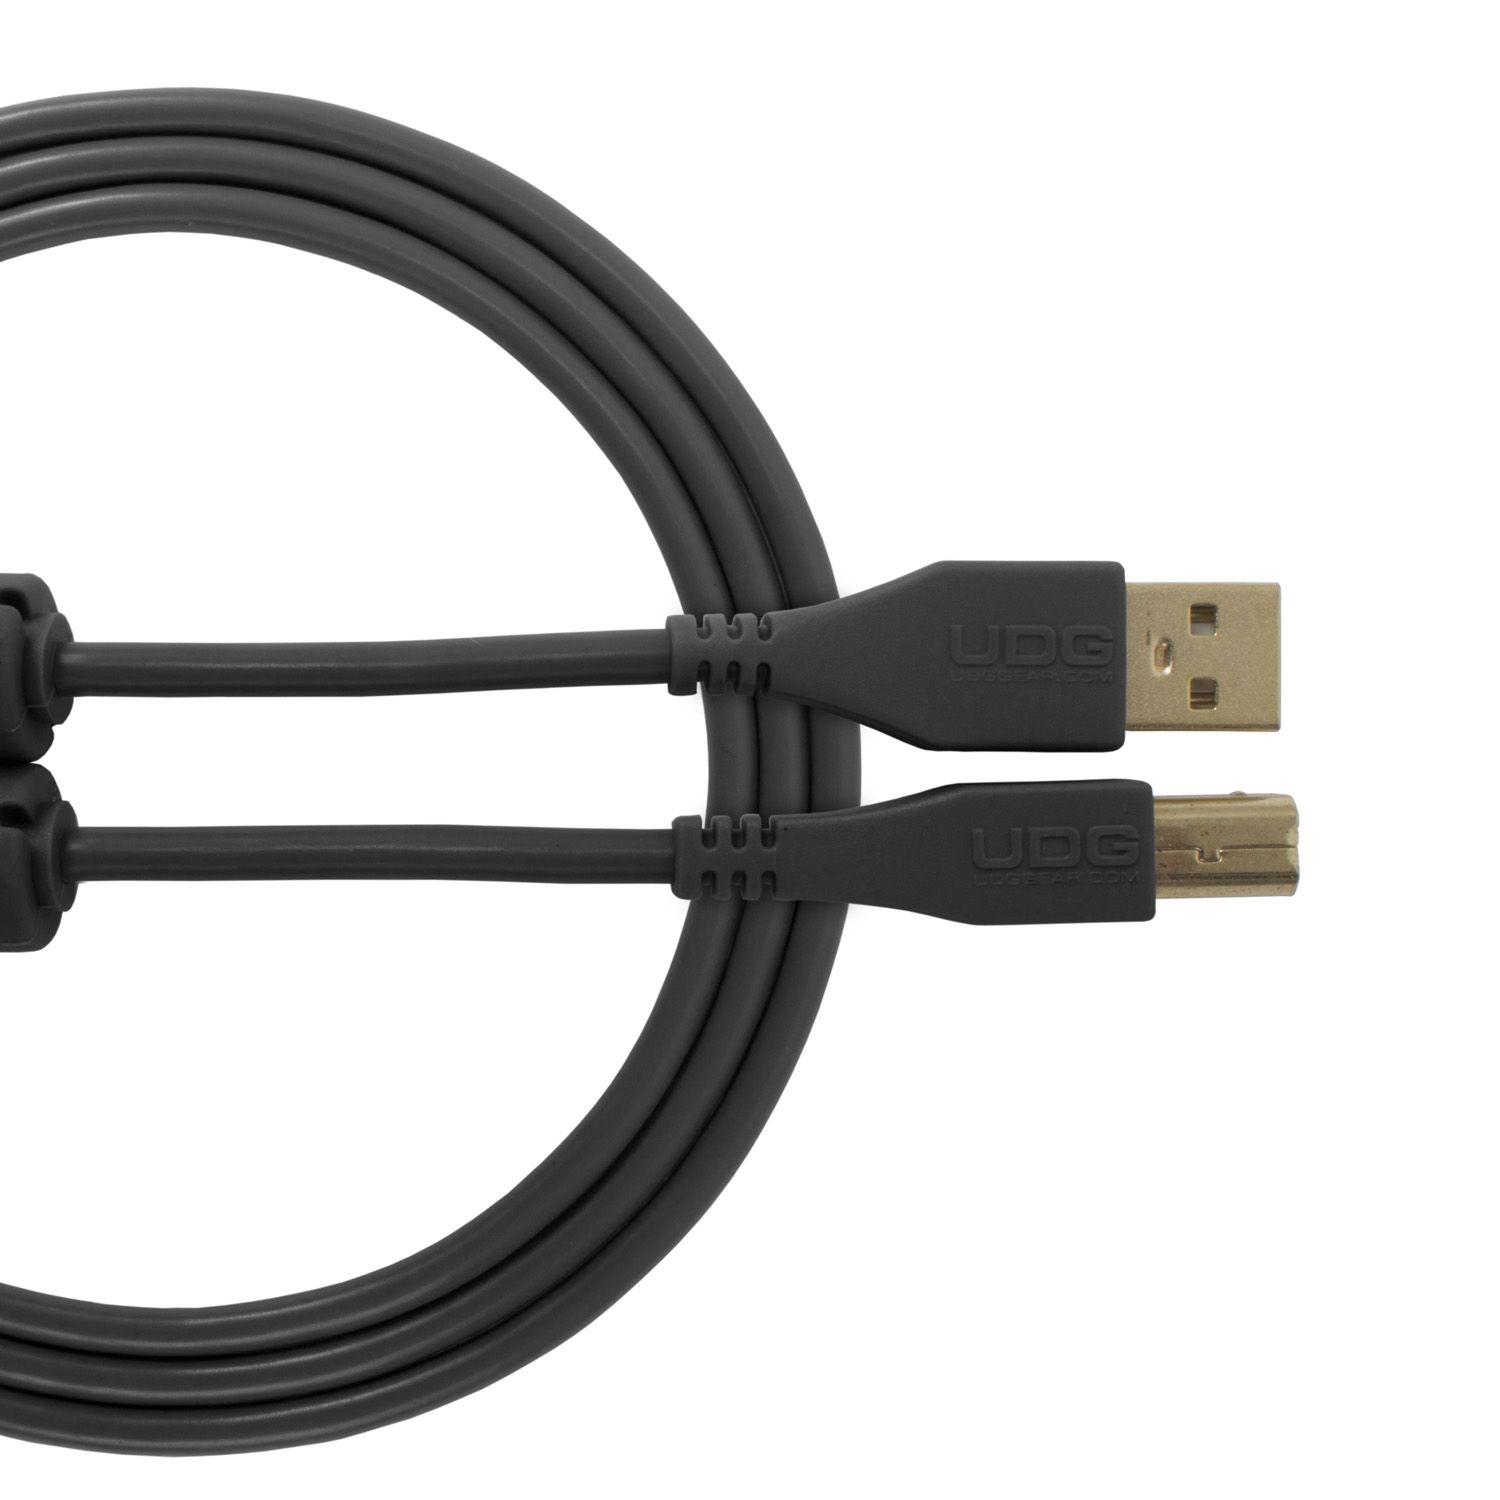 UDG CABLE USB